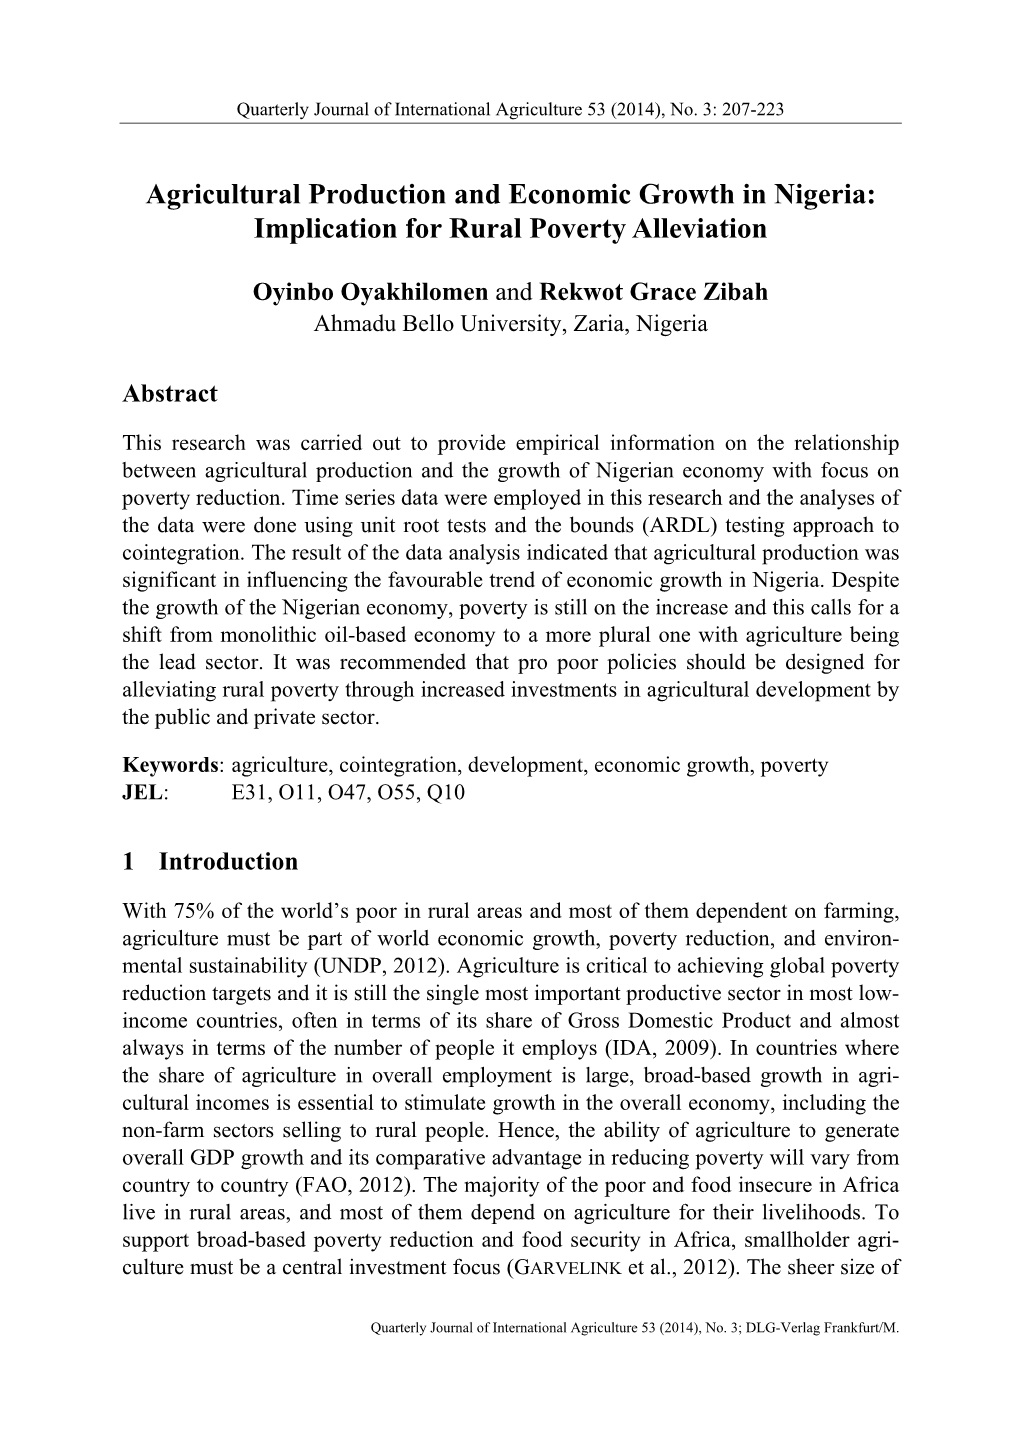 Agricultural Production and Economic Growth in Nigeria: Implication for Rural Poverty Alleviation